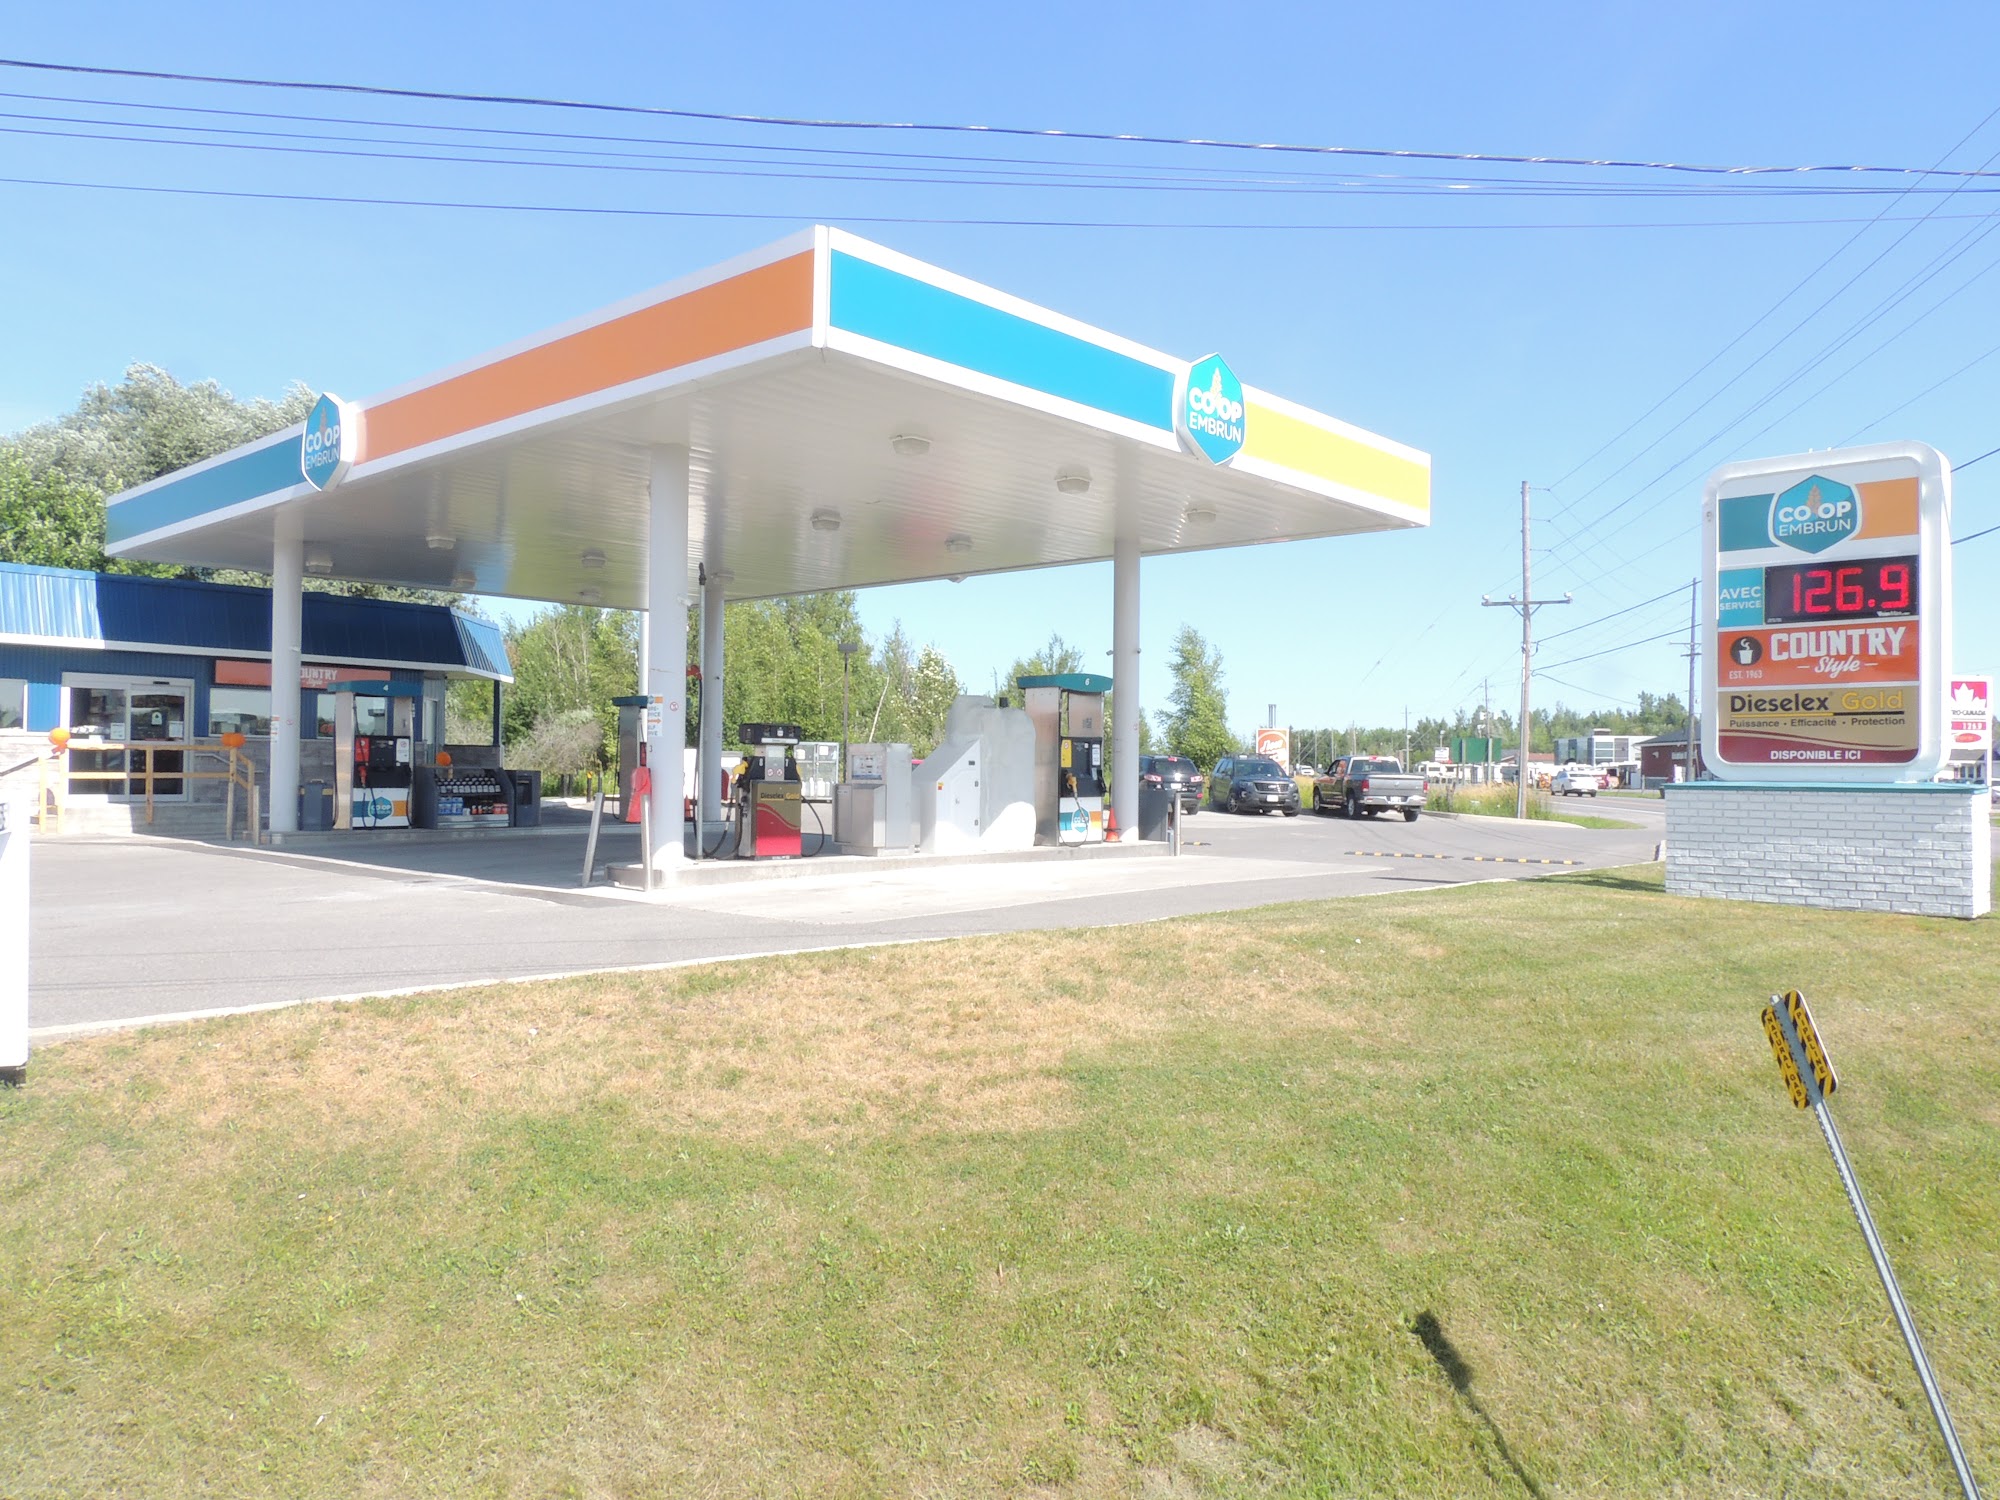 Co-op Express Gas Station